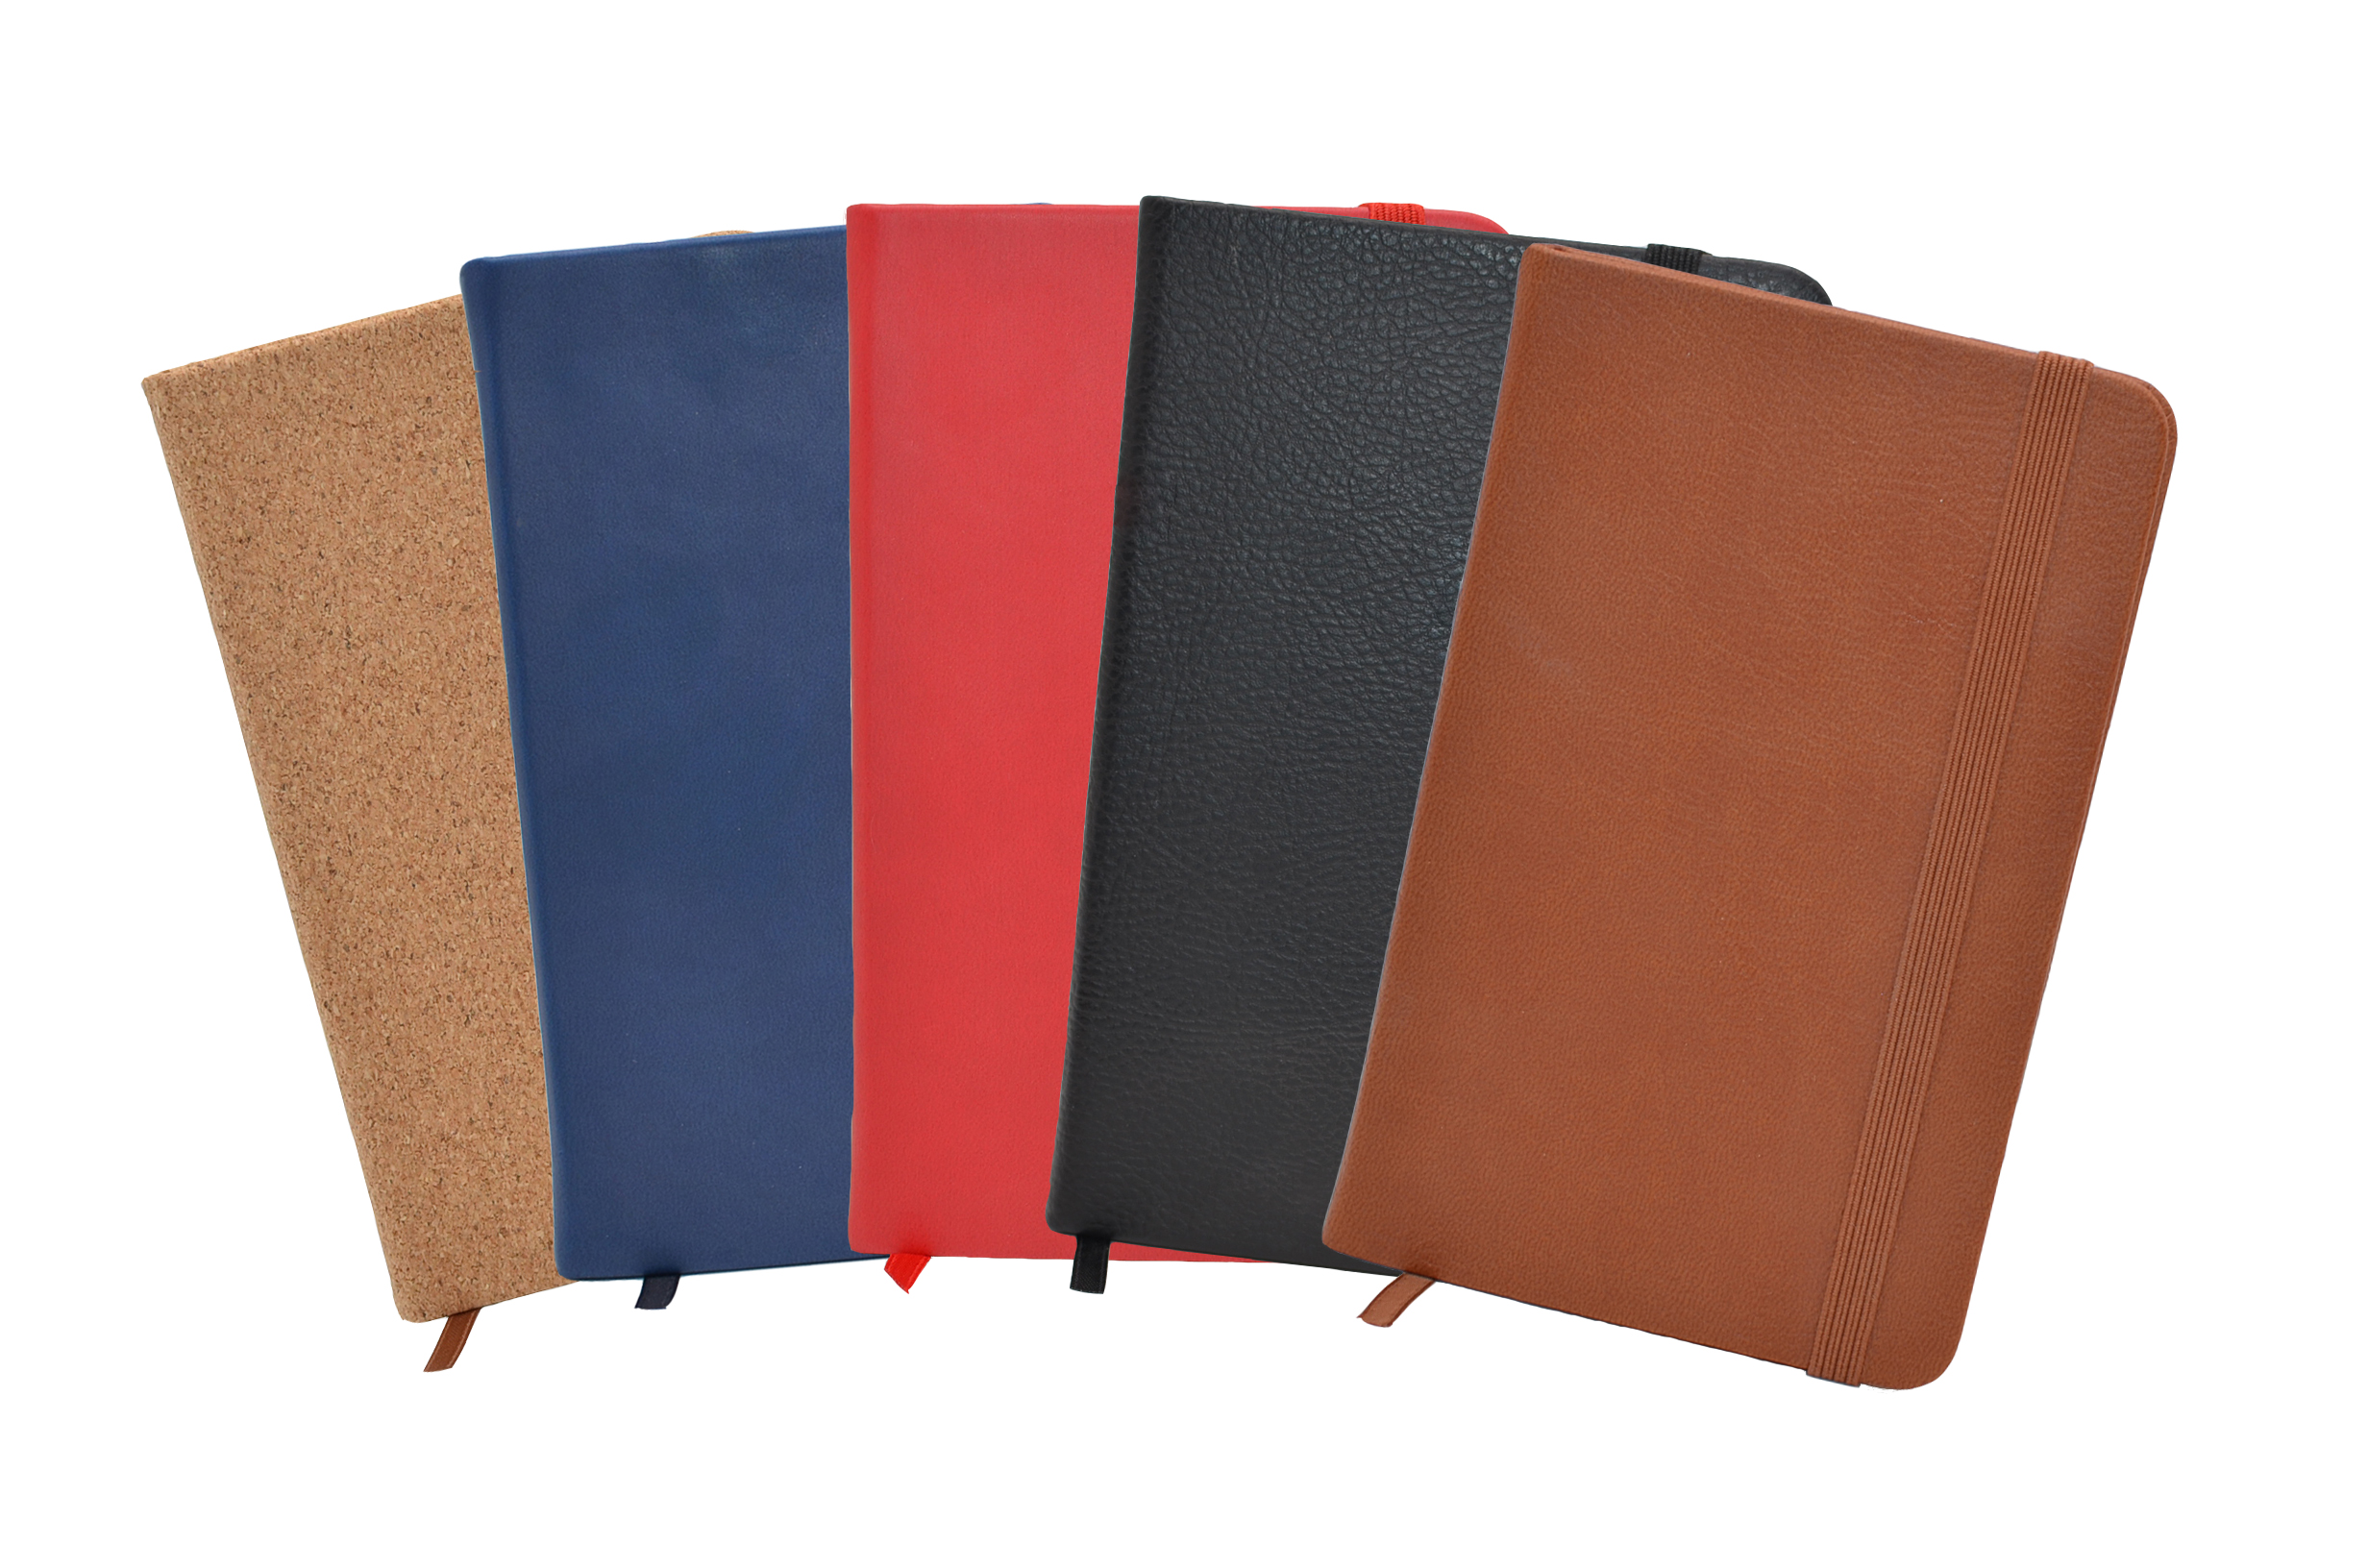 3 X 5 Lined Faux Leather Bound Journals, Leather Bound Lined Journal